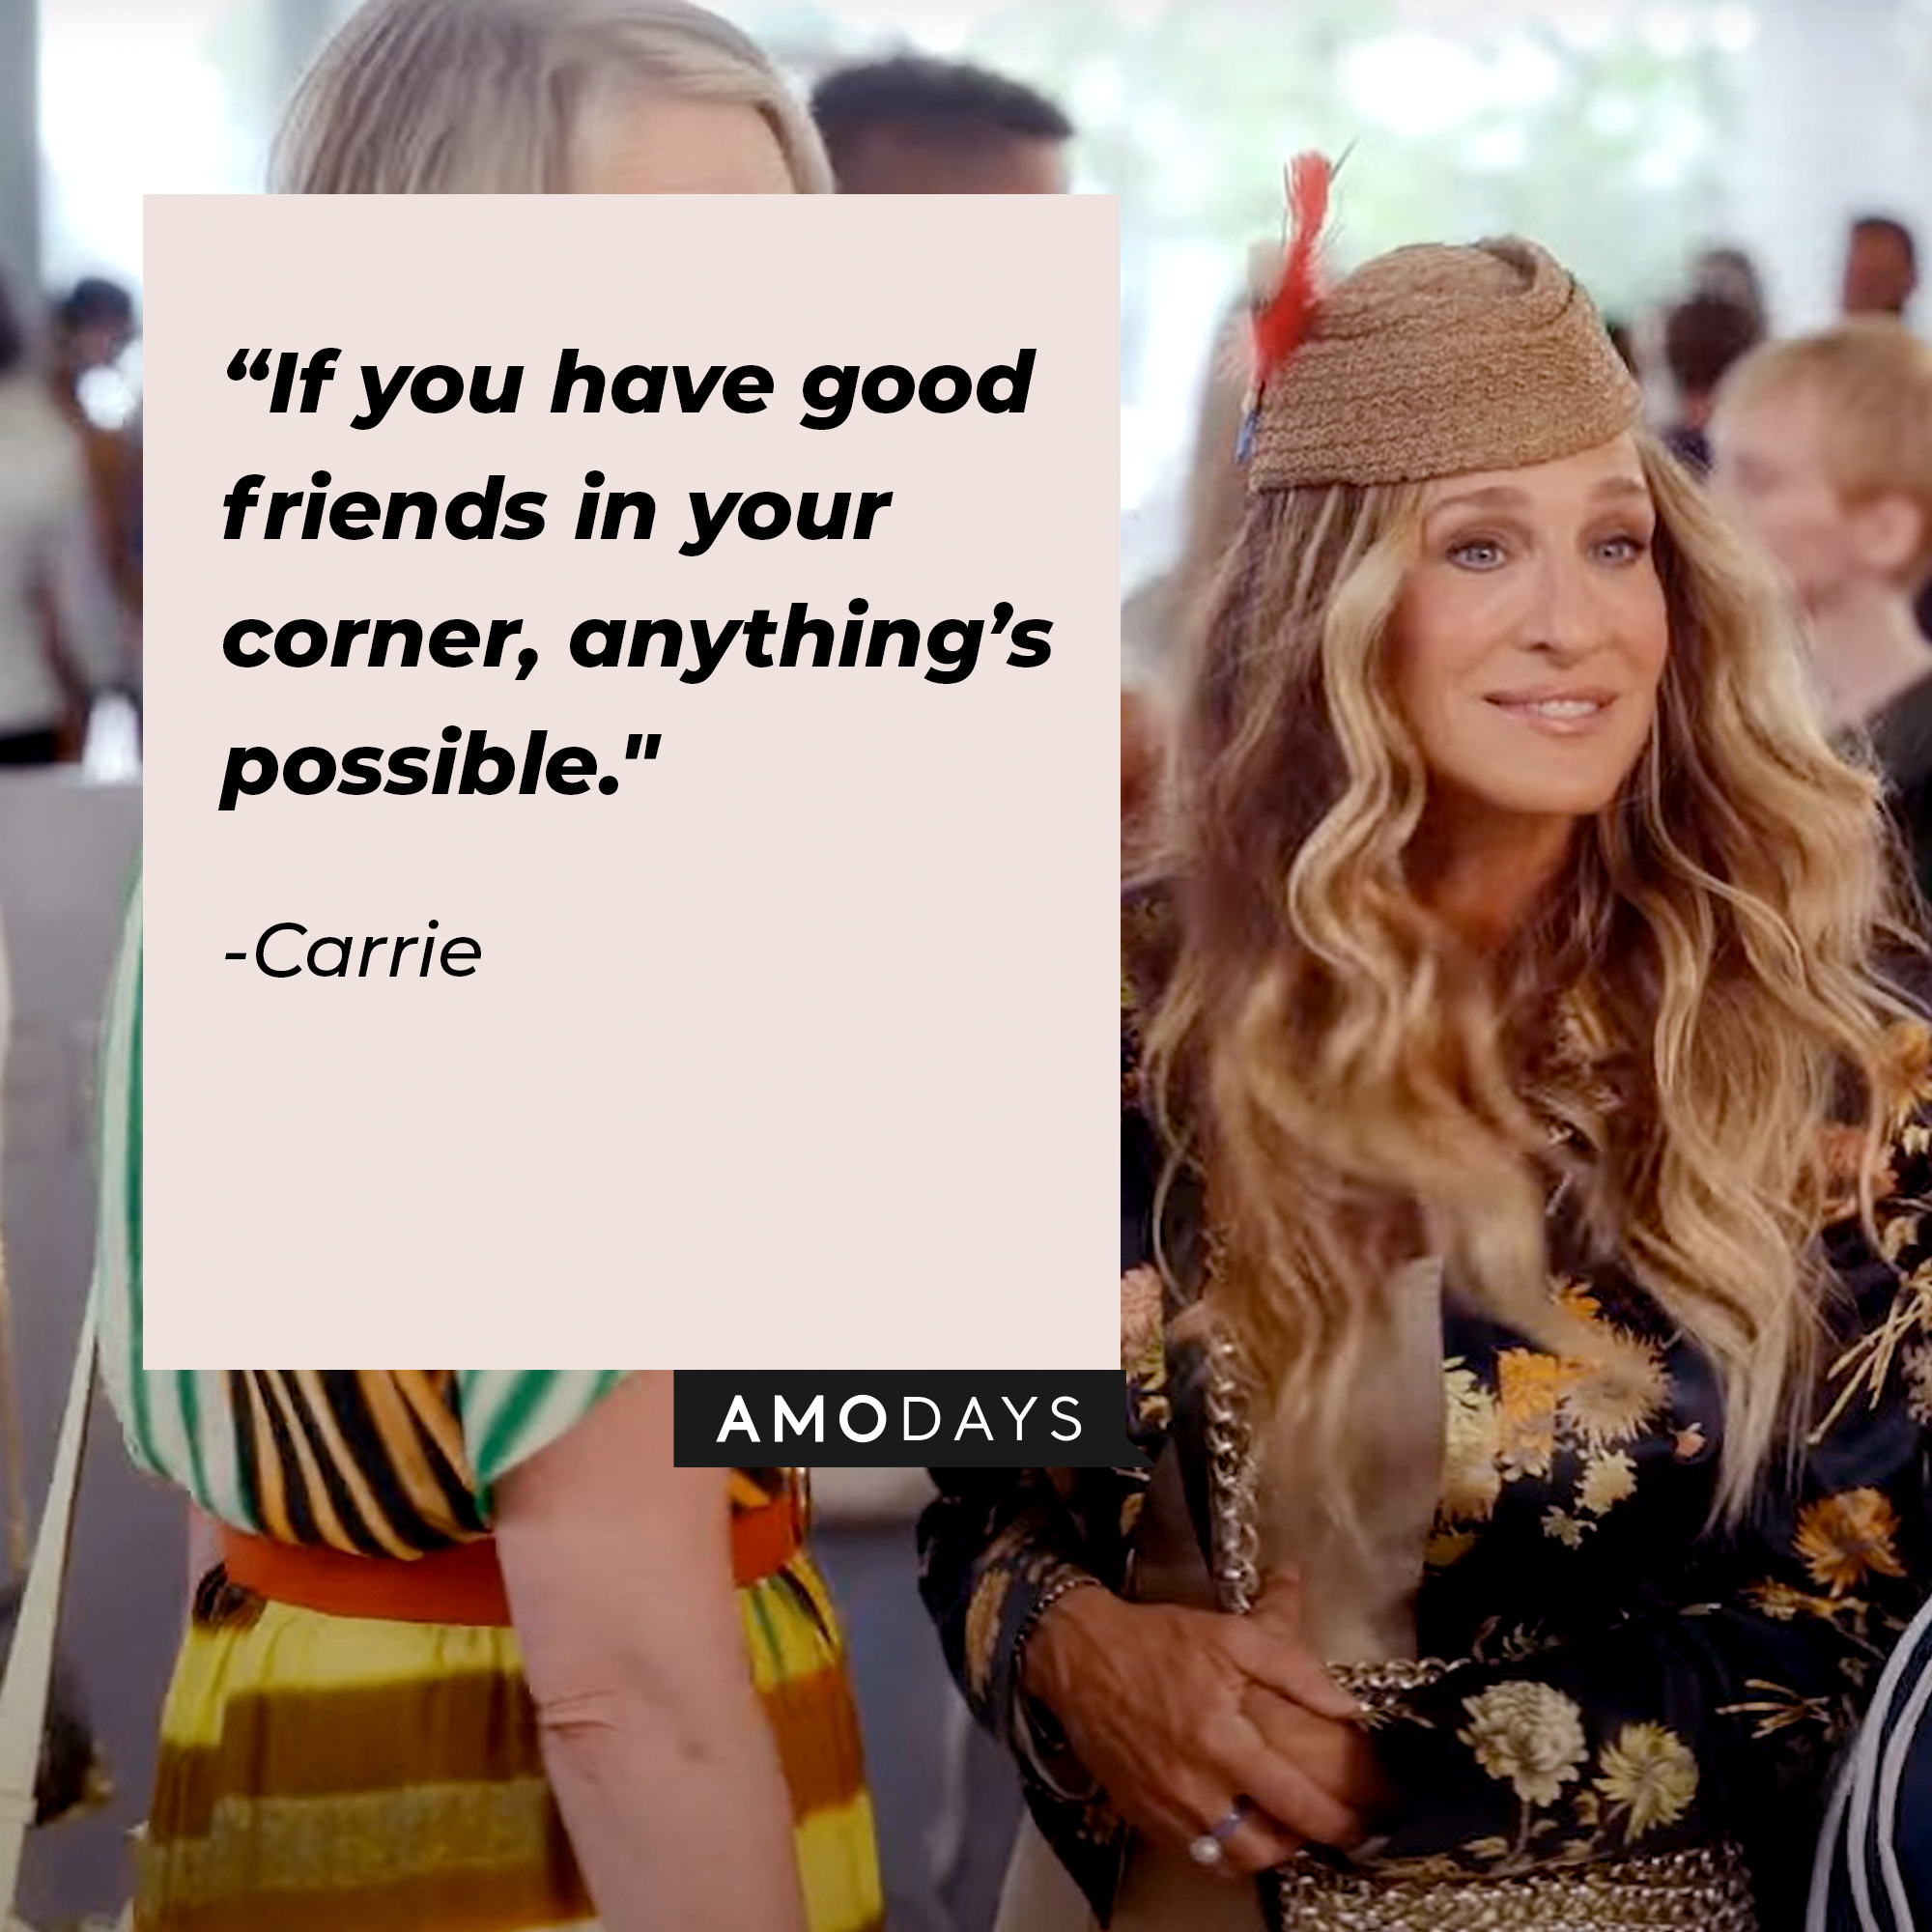 An image of Carrie with her quote:  “If you have good friends in your corner, anything’s possible." | facebook.com/justlikethatmax